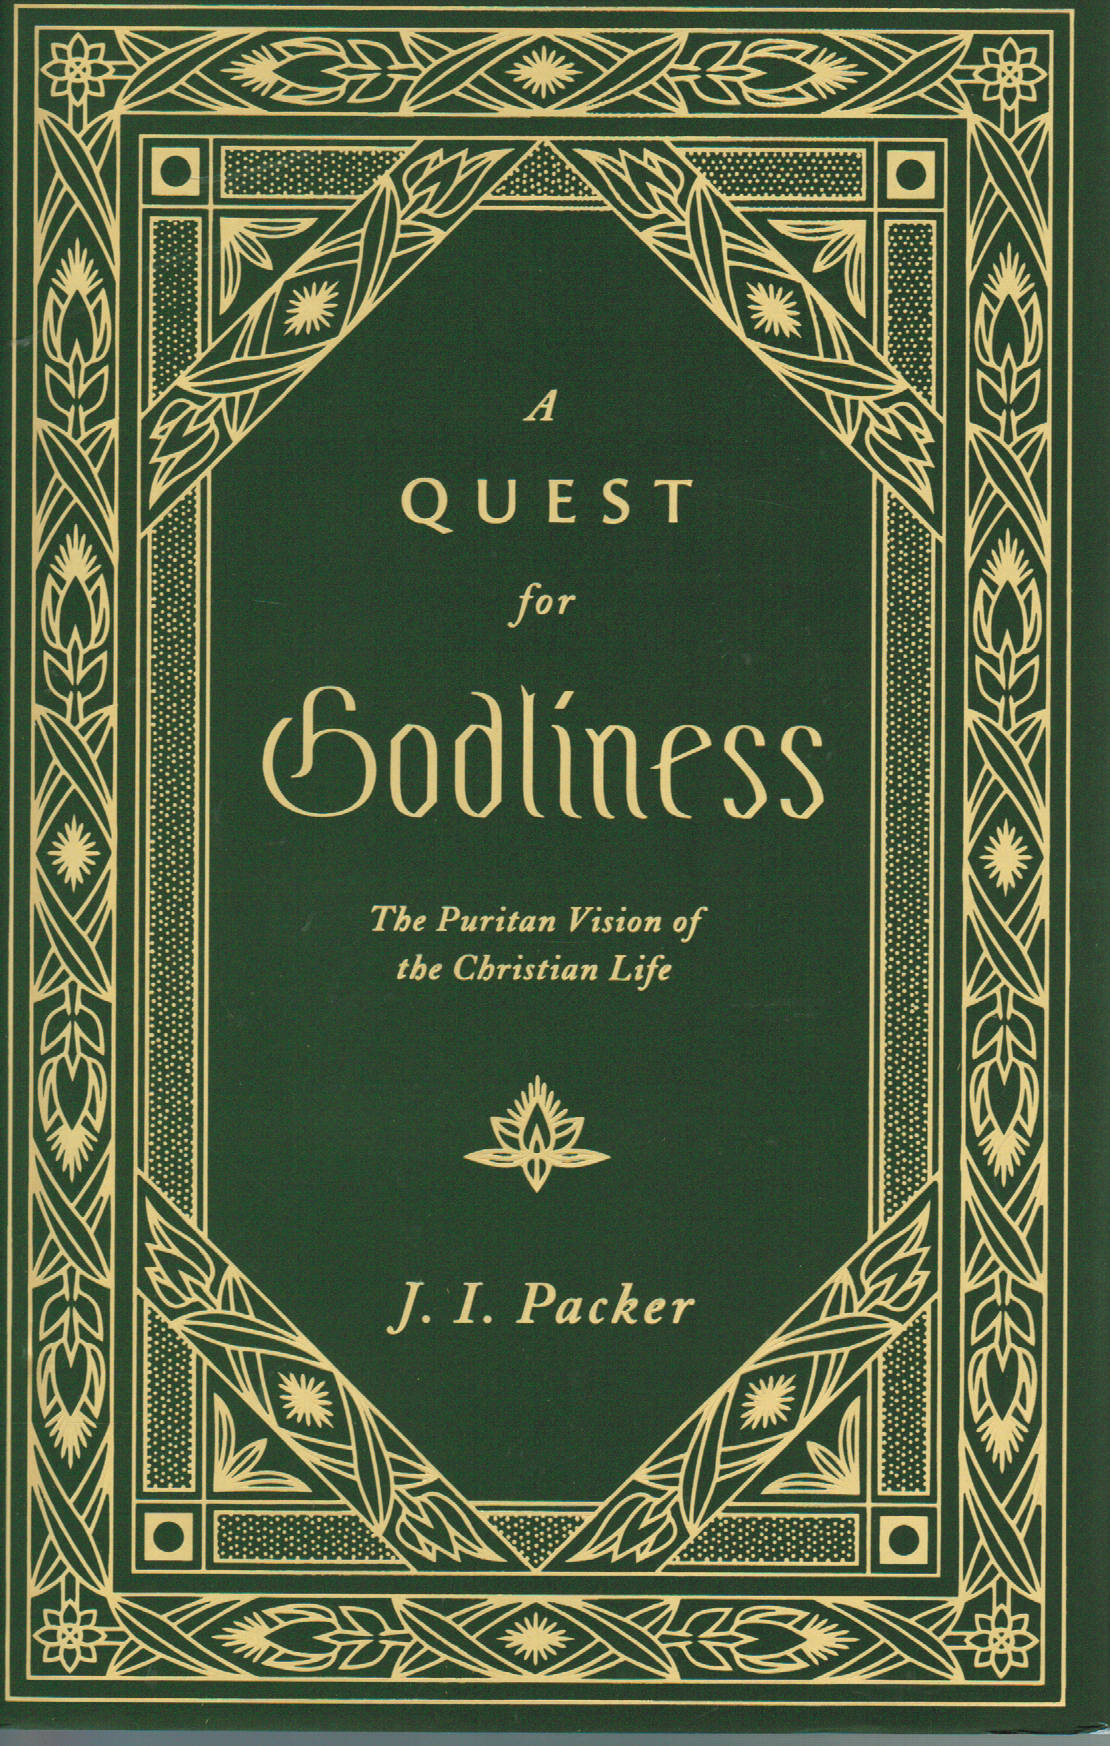 A Quest for Godliness: the Puritan Vision of the Christian Life